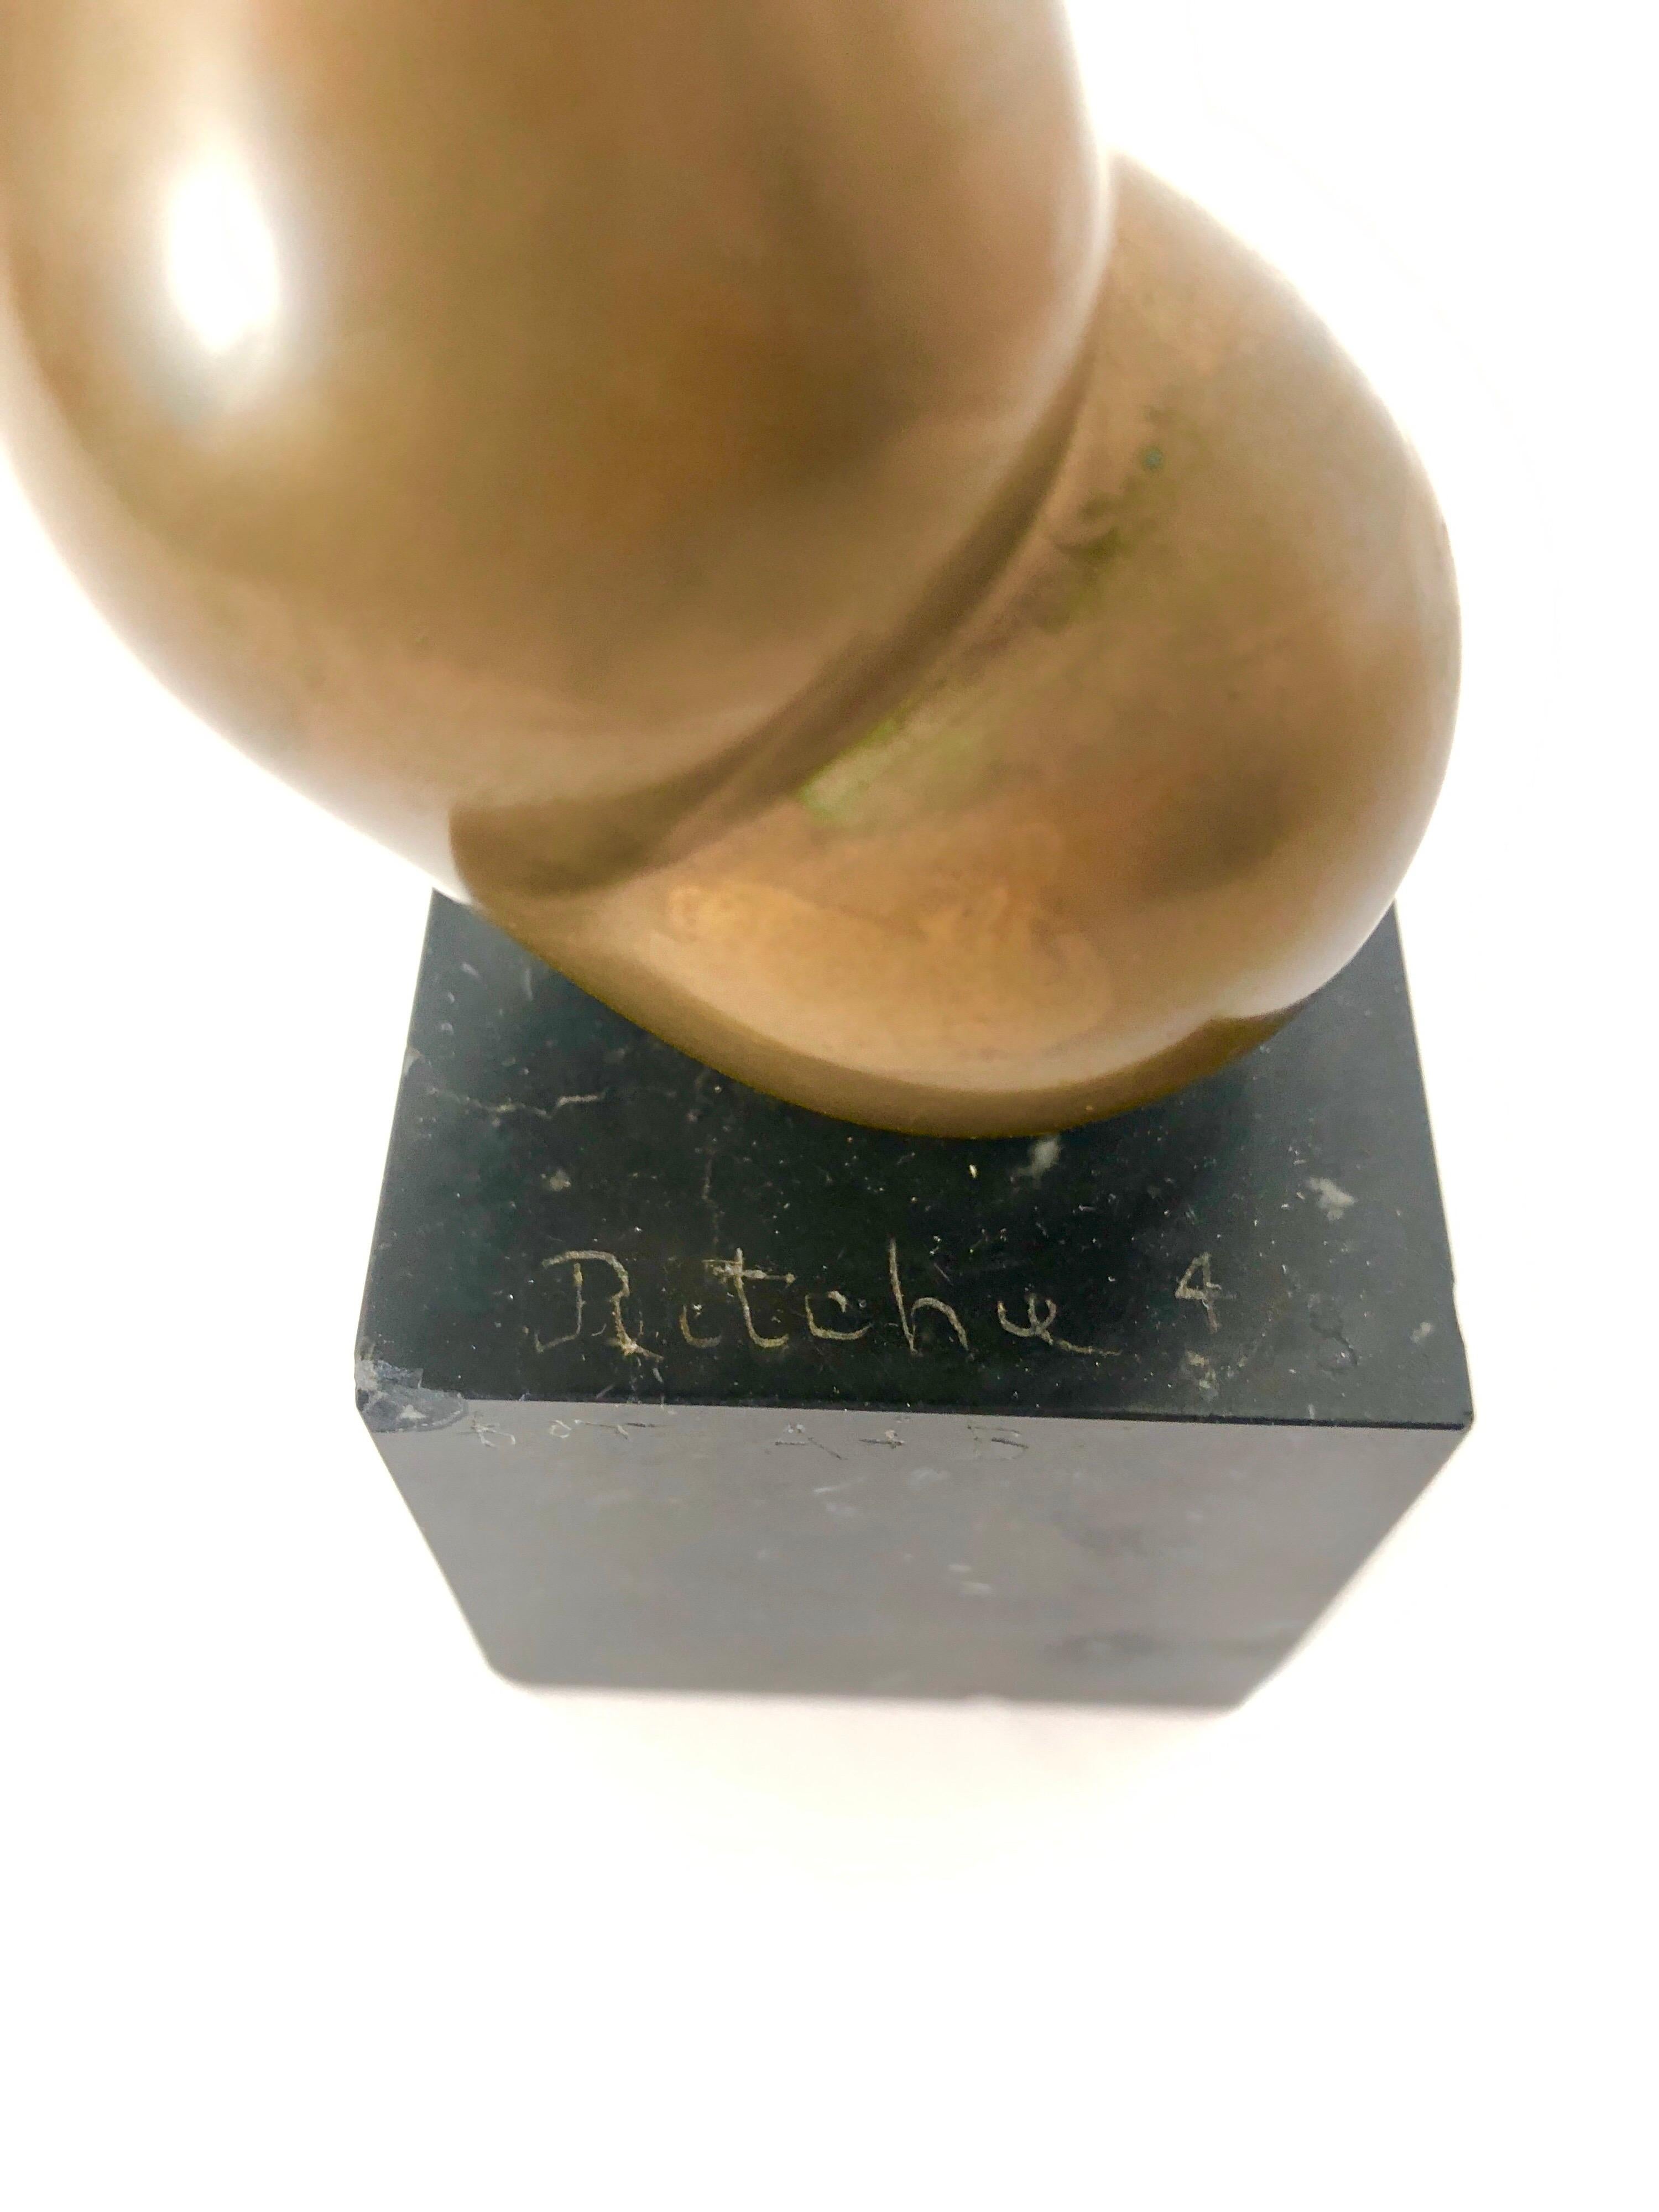 Figural Abstract Bronze Sculpture James Ritchie French Canadian Modernist  2